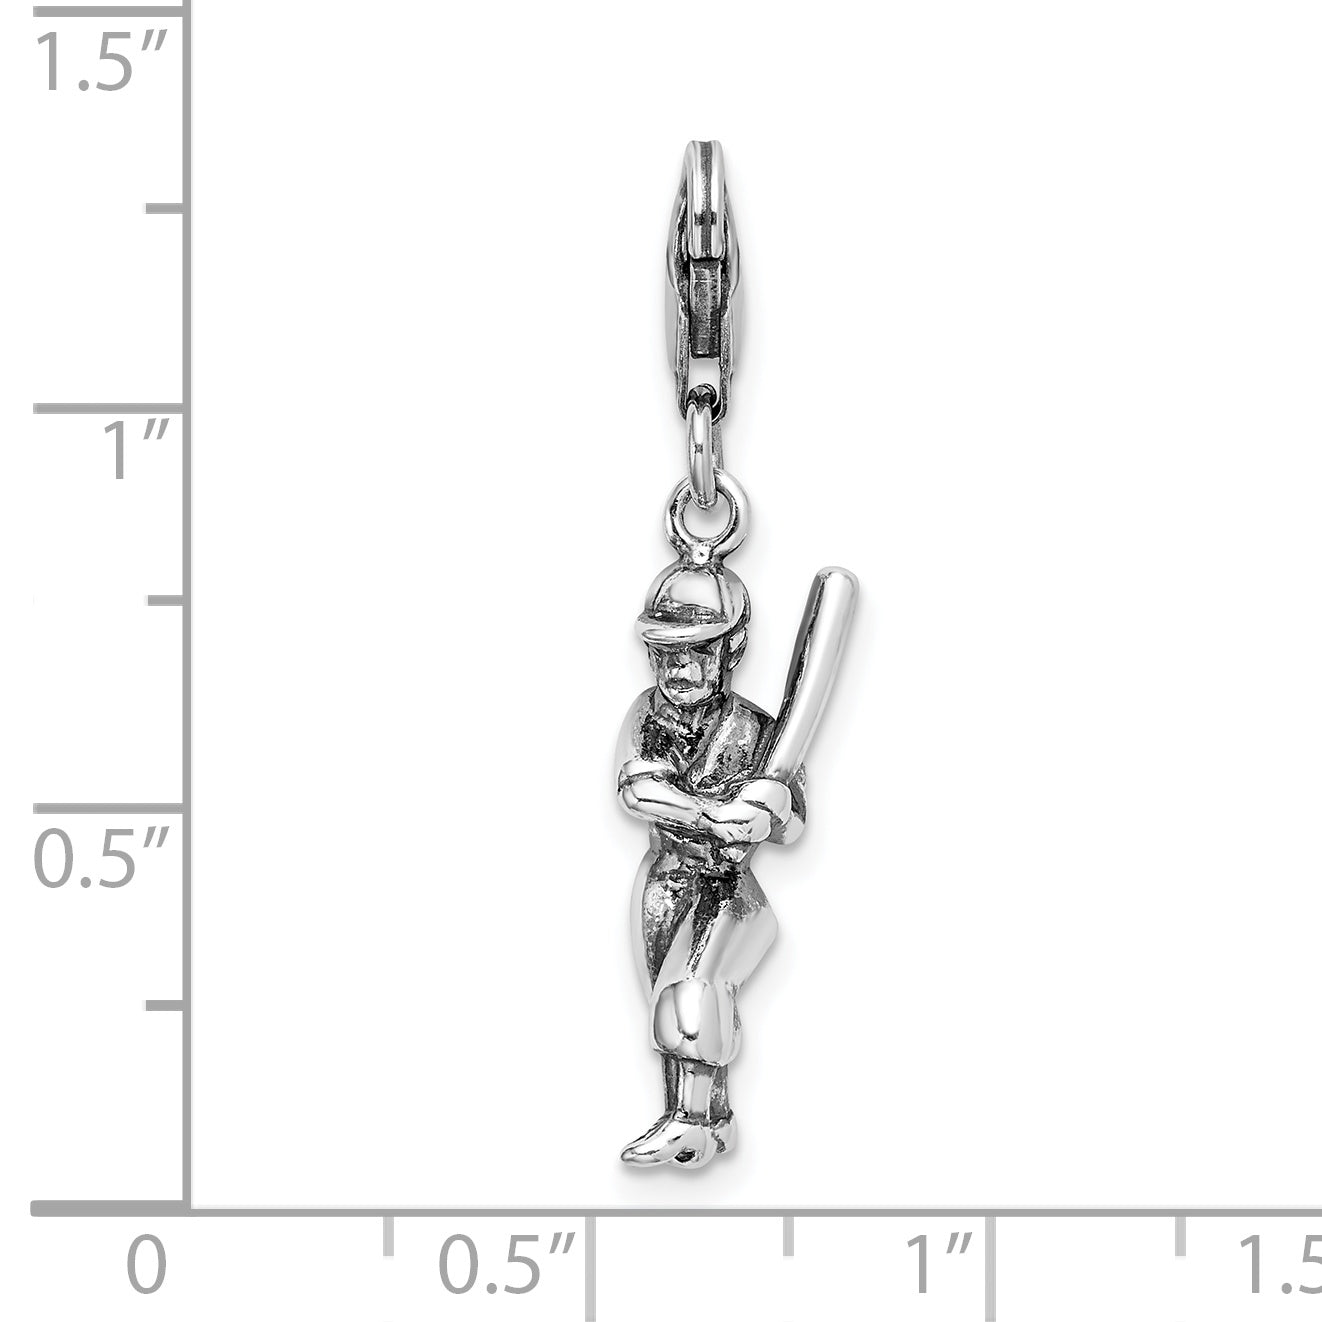 Amore La Vita Sterling Silver Rhodium-plated Polished 3-D Antiqued Baseball Player Charm with Fancy Lobster Clasp